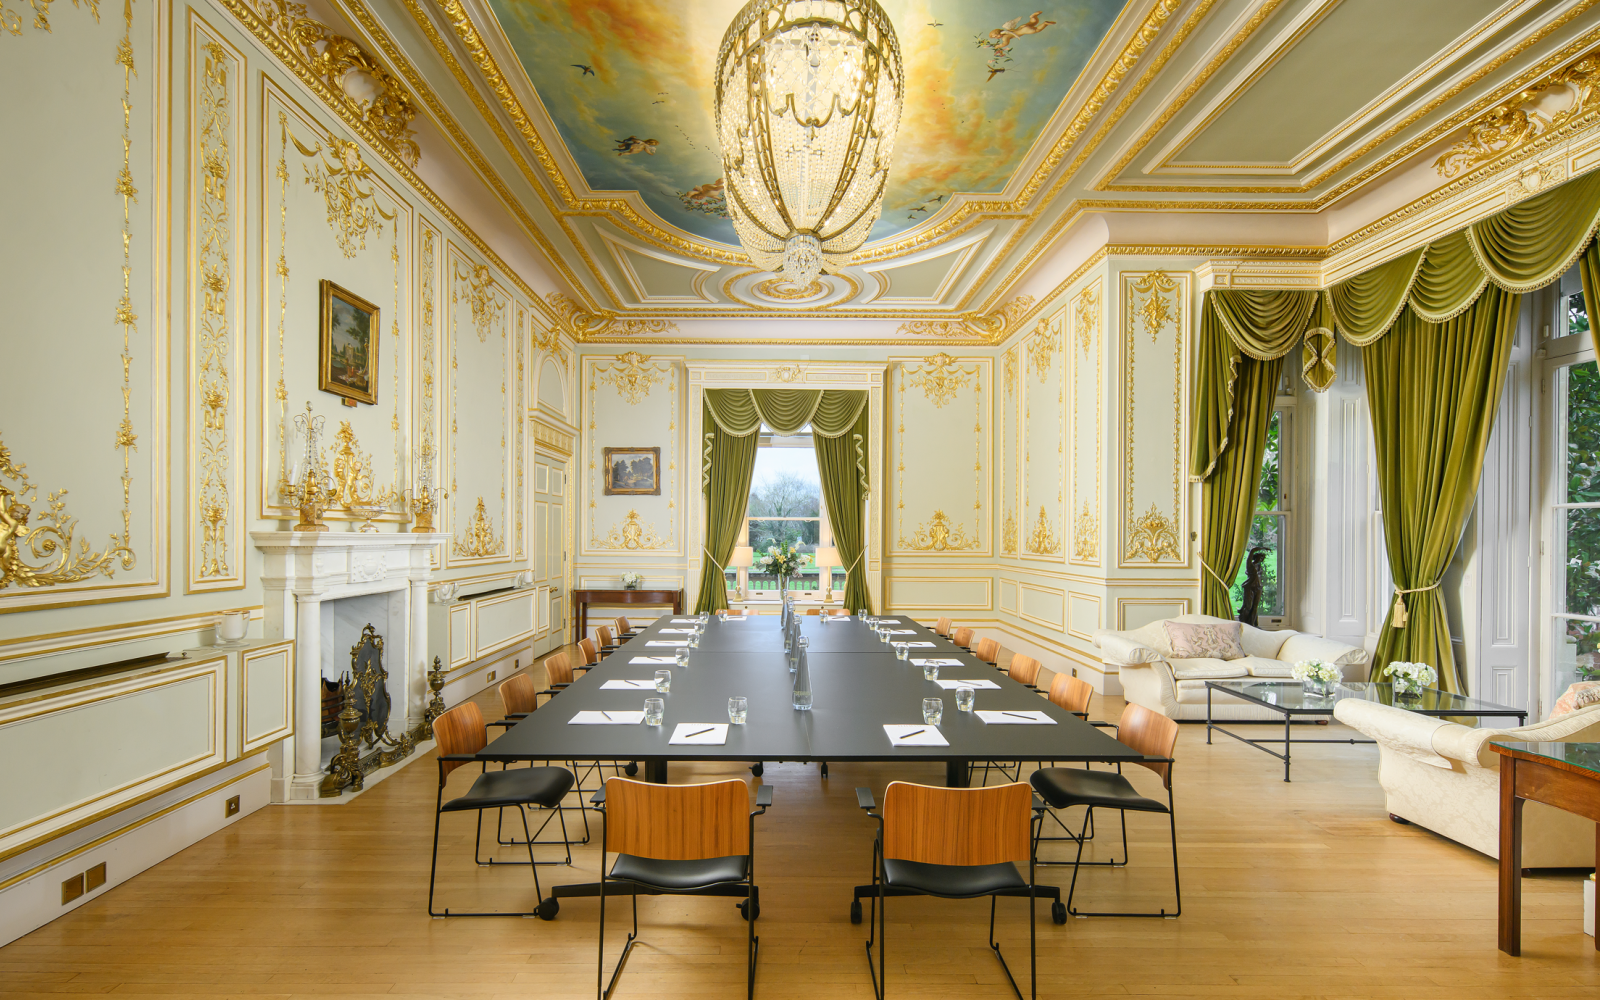 Meeting rooms in Leatherhead - The Salon at Fetcham Park set up for a boardroom meeting